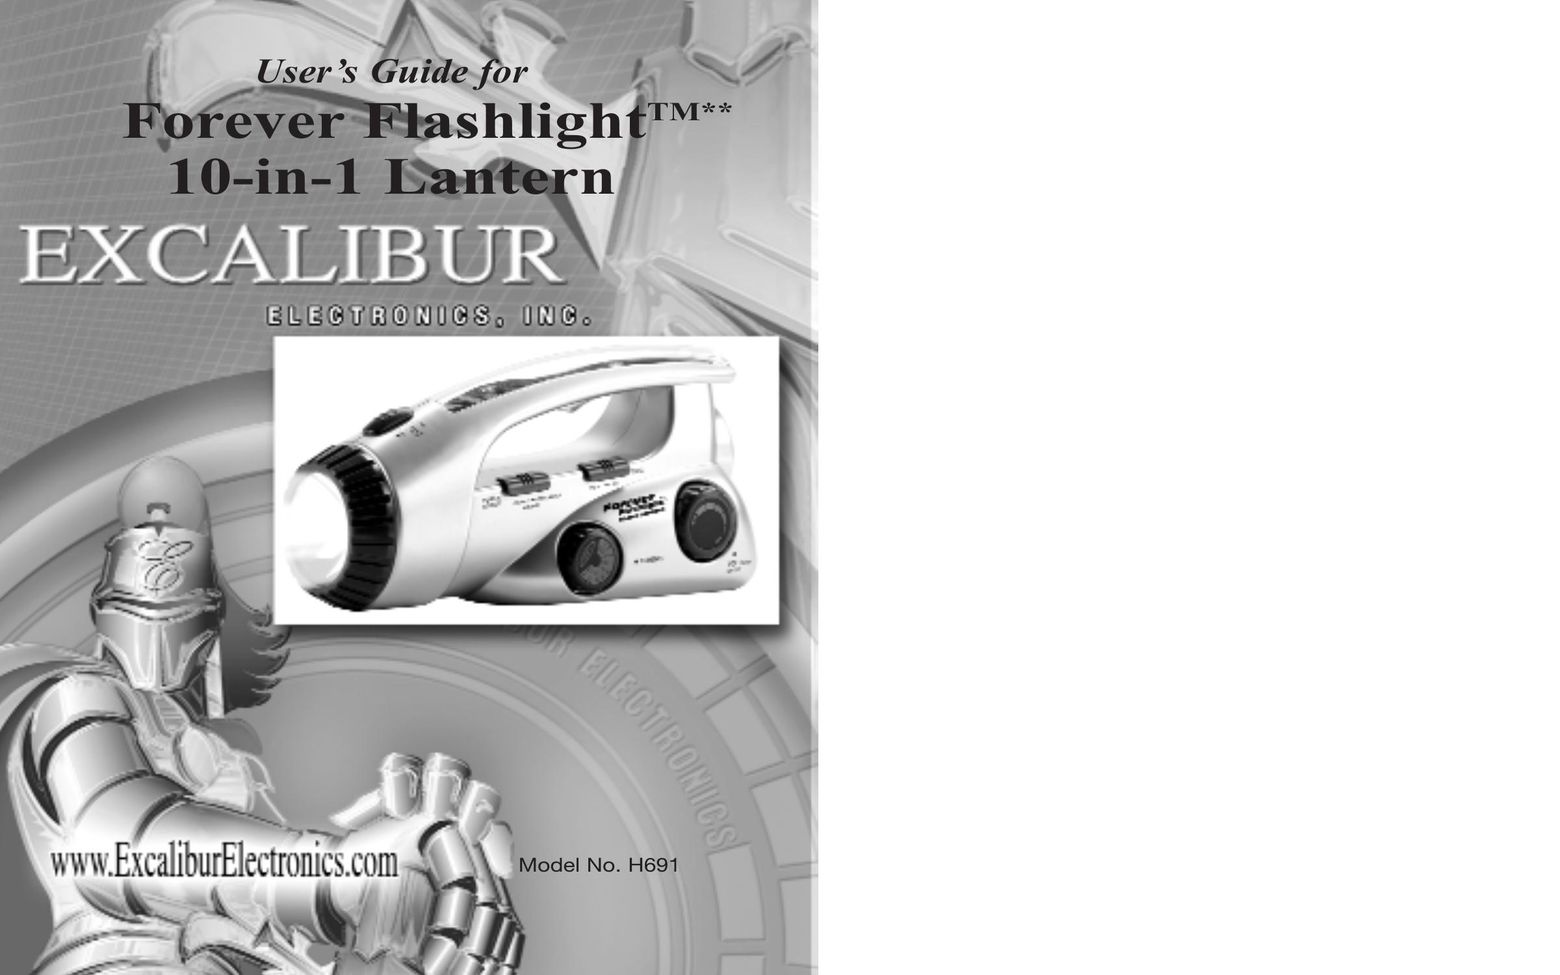 Excalibur electronic H691 Home Safety Product User Manual